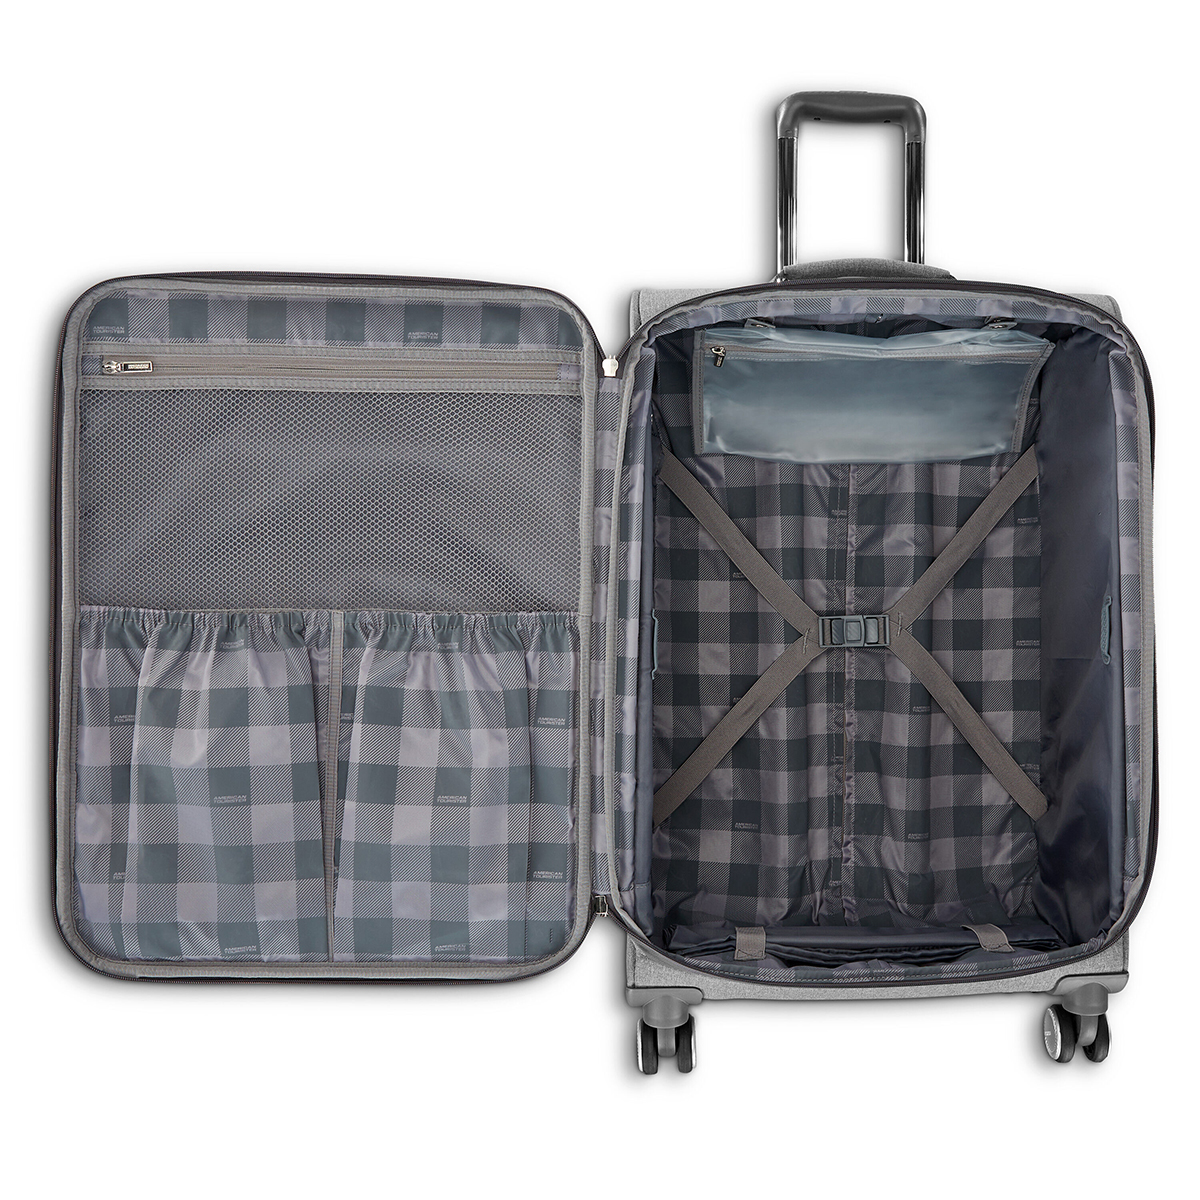 American Tourister(R) Whim 25in. Spinner Luggage